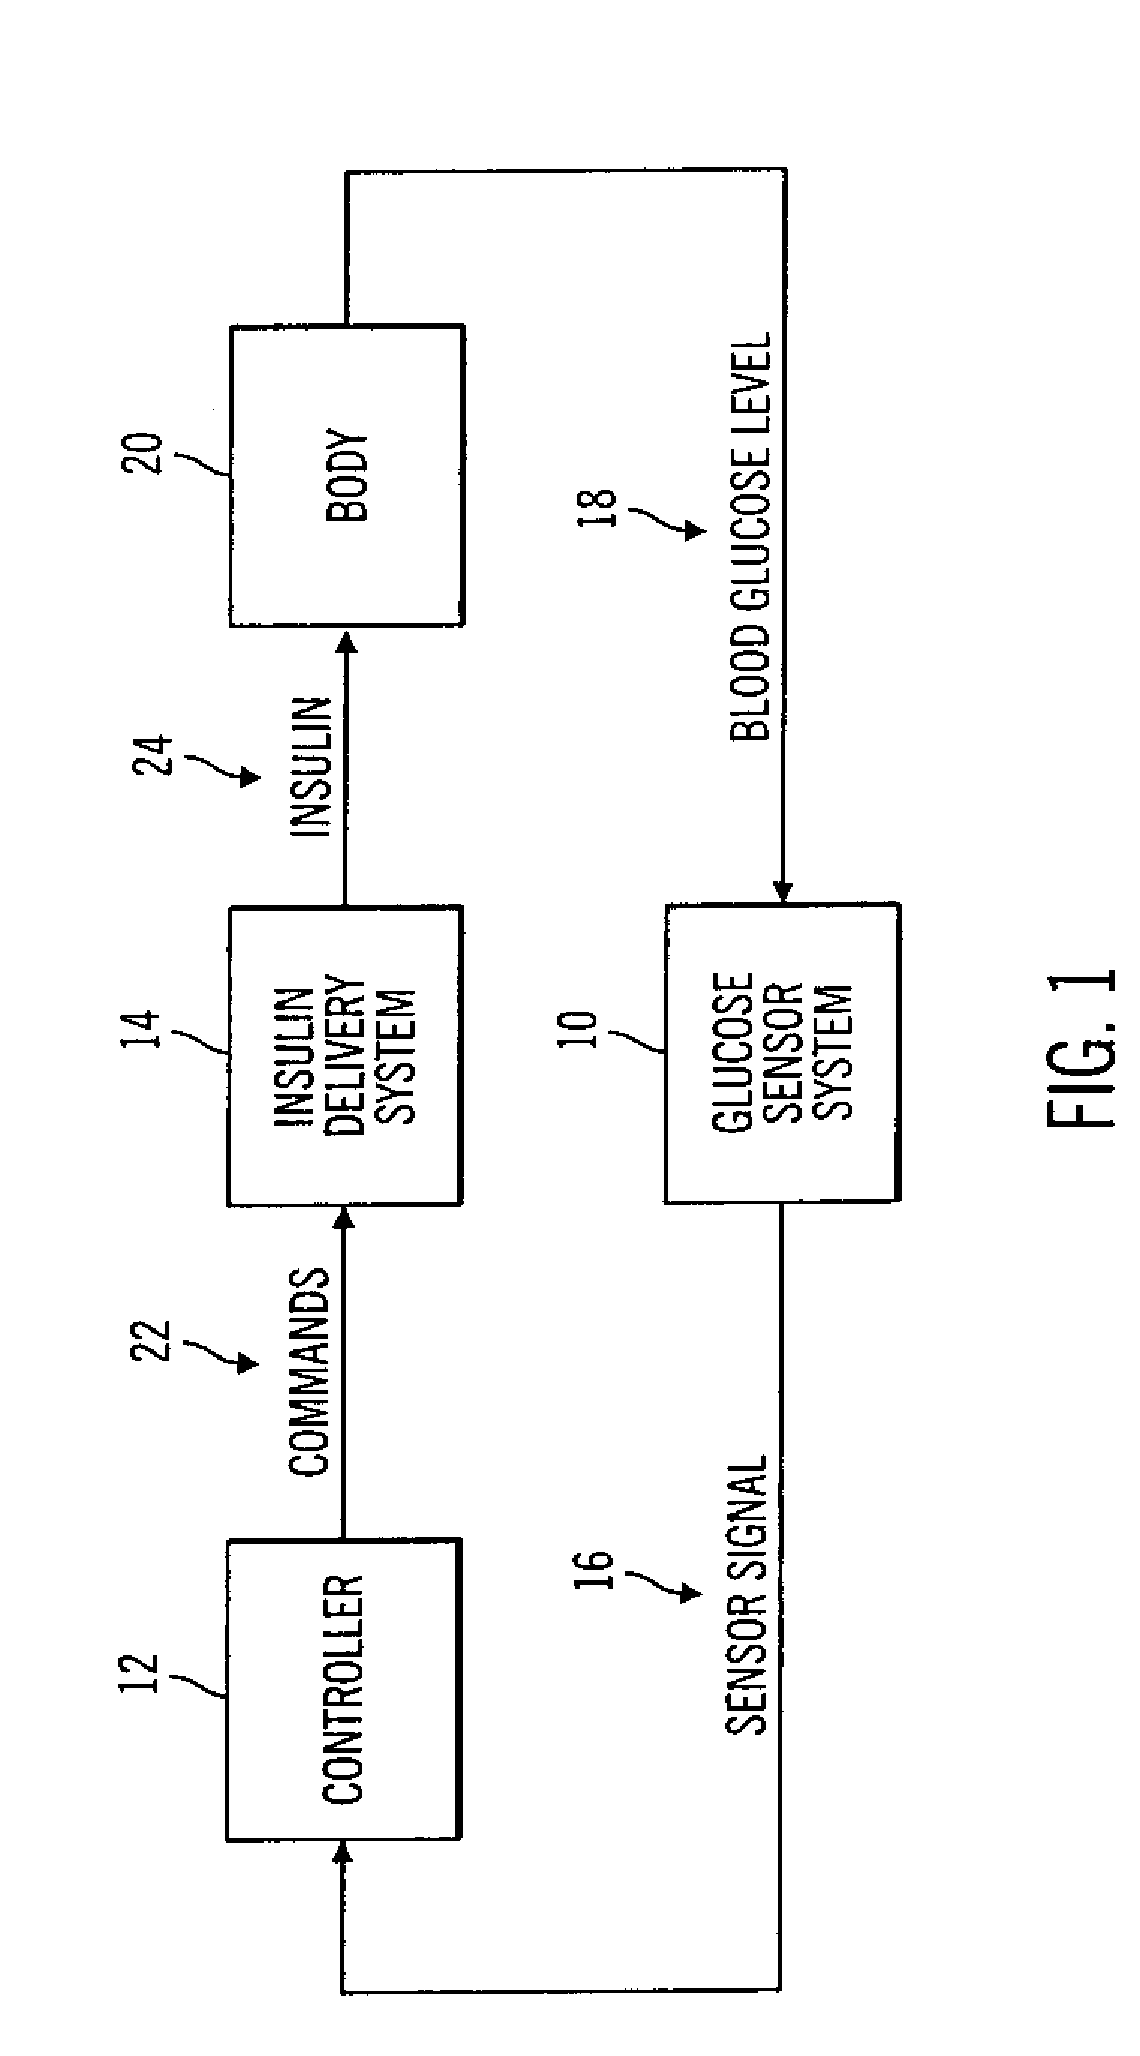 Closed-Loop Method for Controlling Insulin Infusion